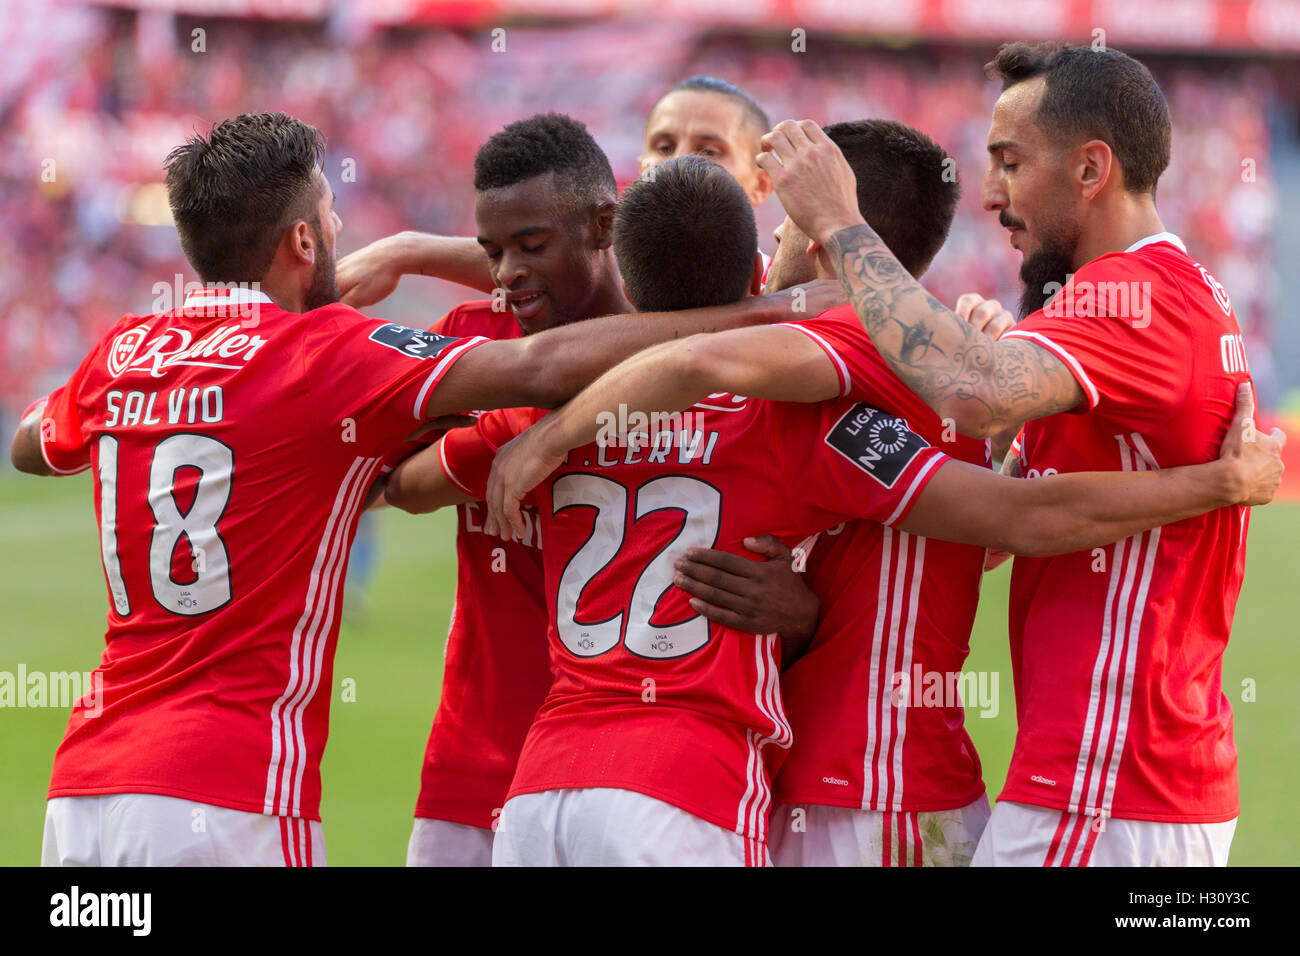 Lisbon, Portugal. 2 Oct, 2016. SL Benfica's Argentinian forward Franco Cervi (22) celebrating after a goal scored with his teammates, during the game SL Benfica vs GD Feirense Credit:  Alexandre de Sousa/Alamy Live News Stock Photo